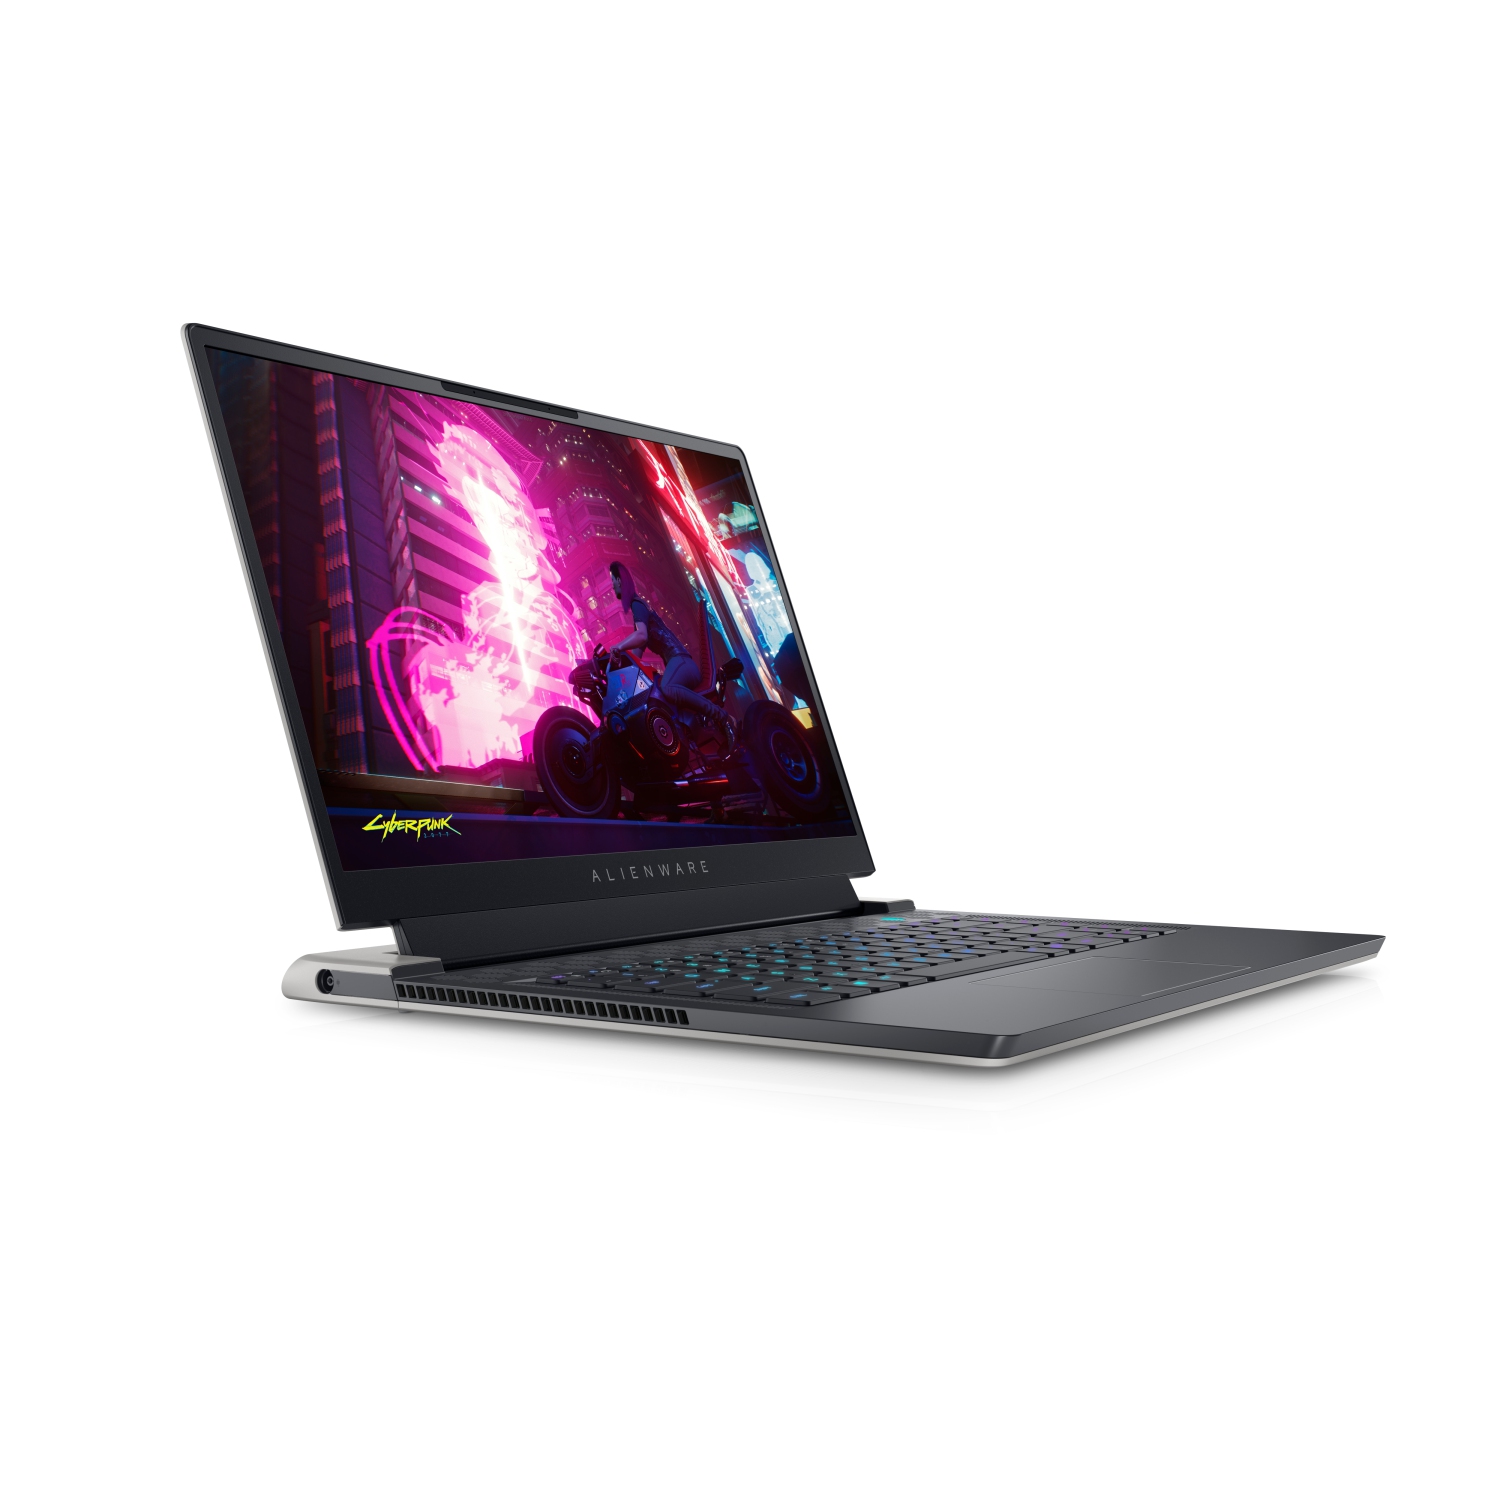 Refurbished (Excellent) - Dell Alienware X15 R1 Gaming Laptop (2021), 15.6" FHD, Core i7 - 256GB SSD + 256GB SSD - 16GB RAM - RTX 3070, 4.6 GHz - 11th Gen CPU Certified